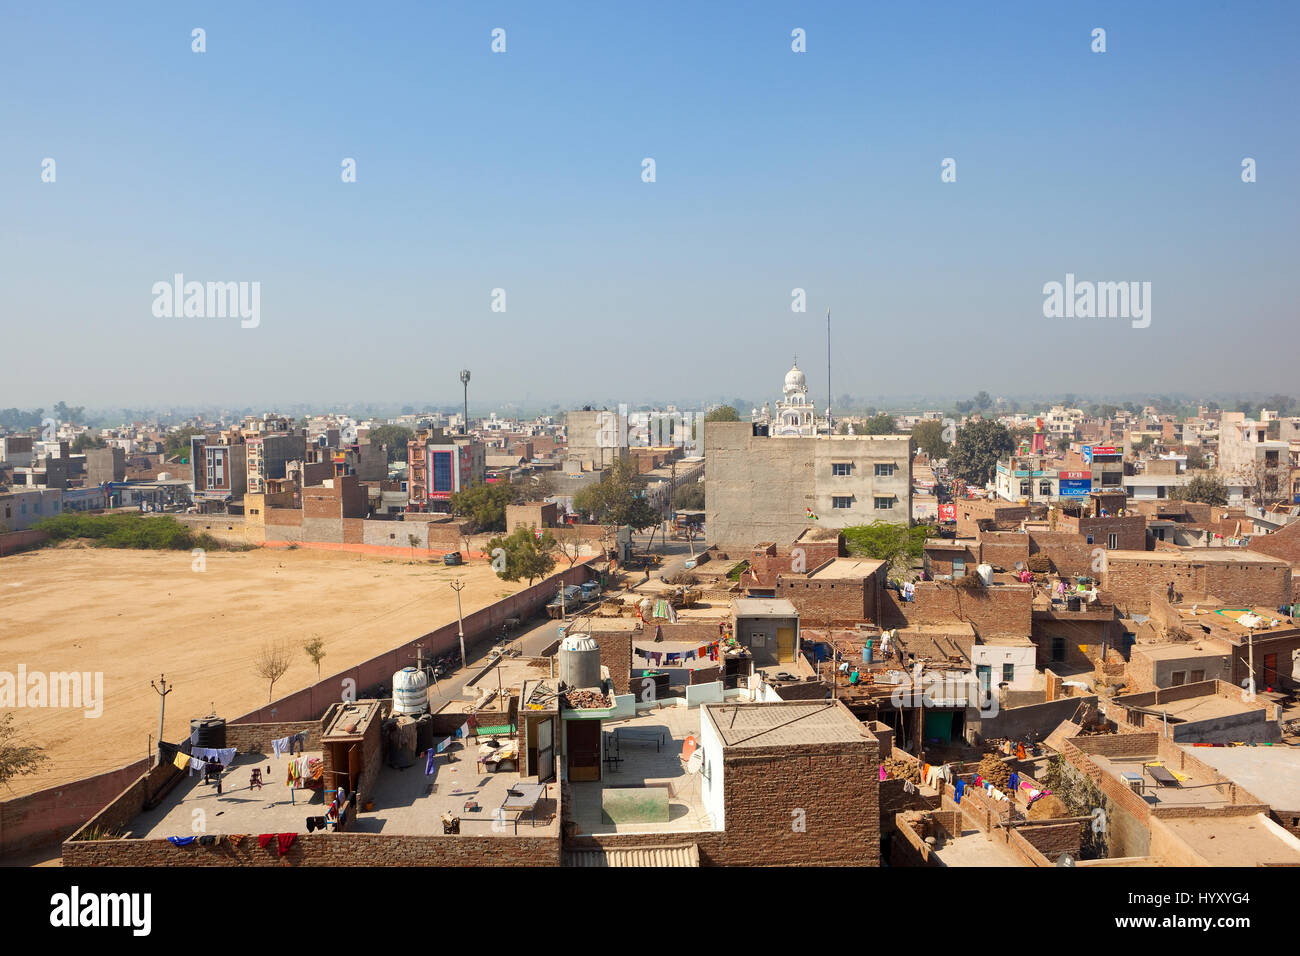 an aerial view of hanumangarh city rajasthan india from the walls of bhatner fort under a clear blue sky Stock Photo